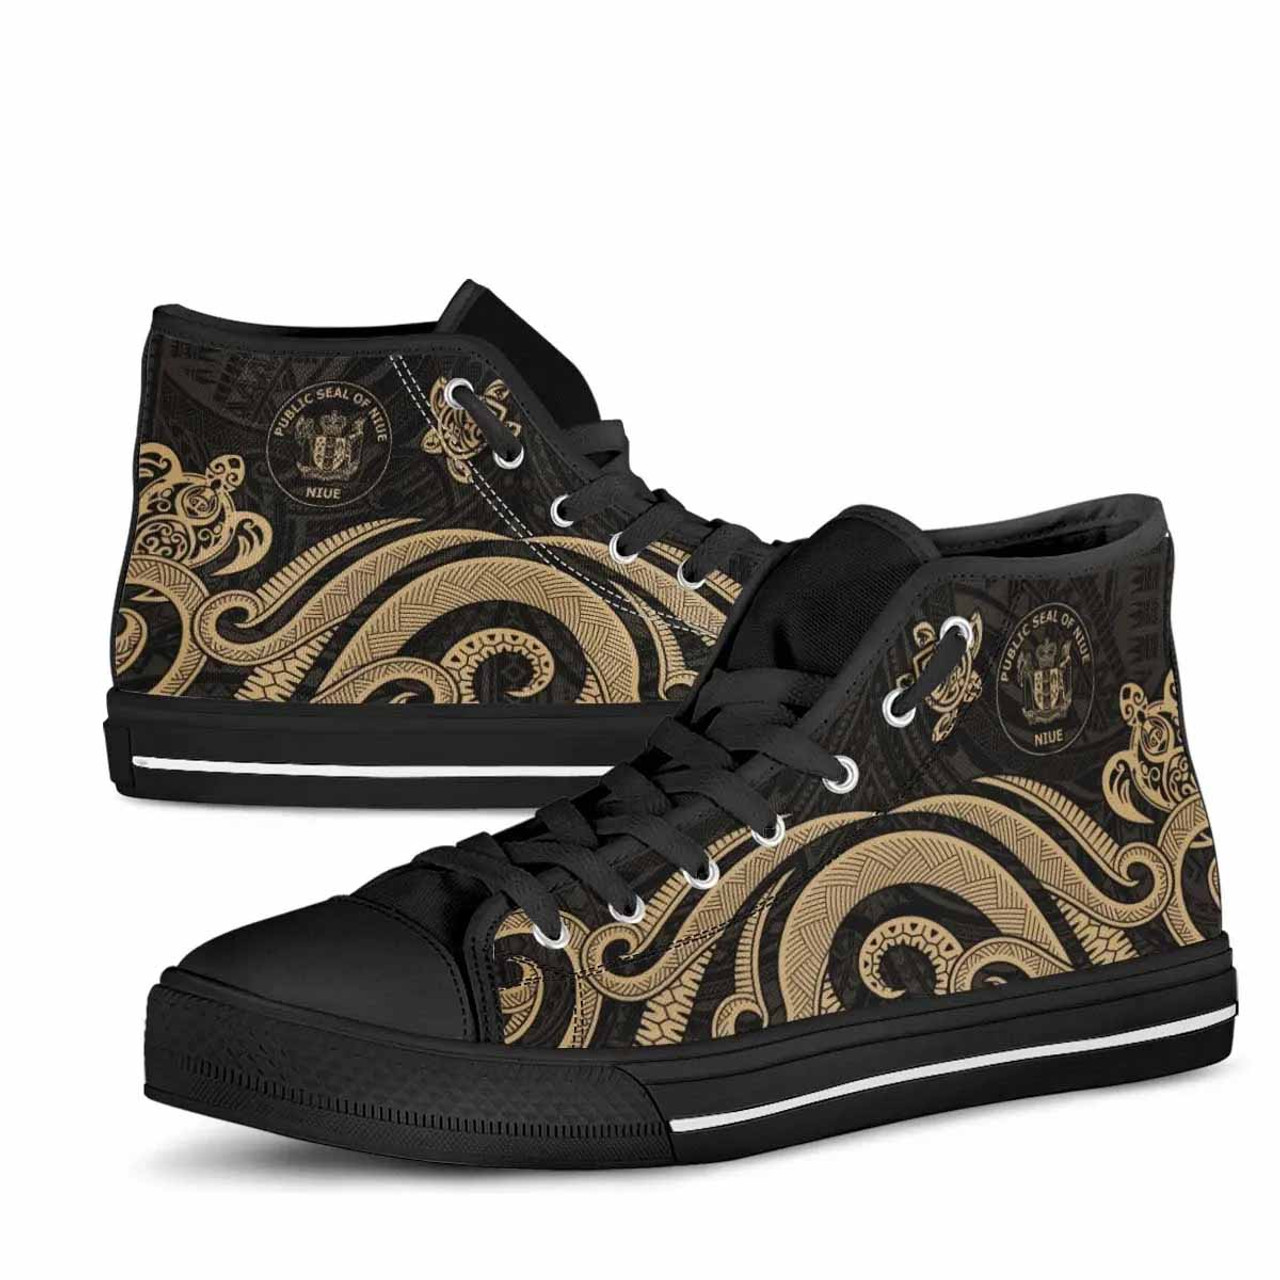 Niue High Top Shoes - Gold Tentacle Turtle 5